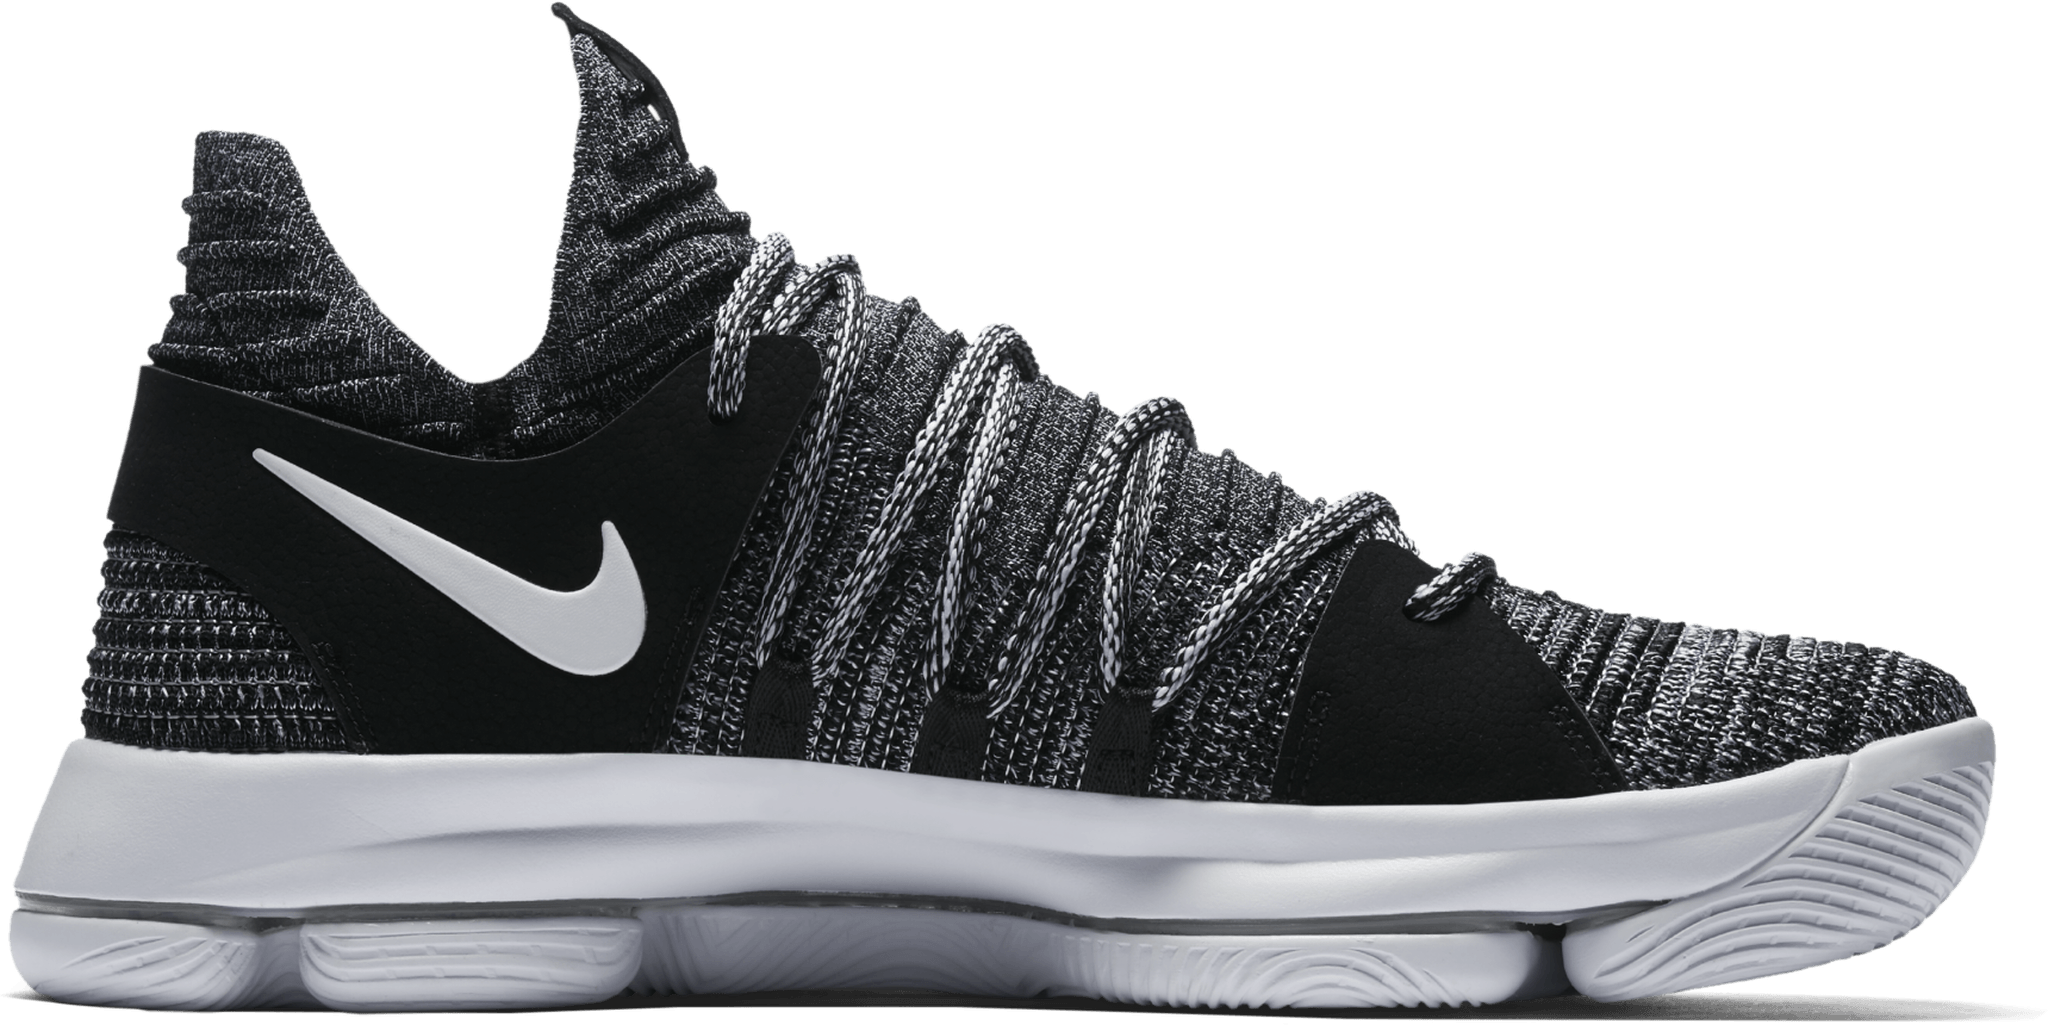 Nike KD 10 - Review, Deals, Pics of 16 Colorways